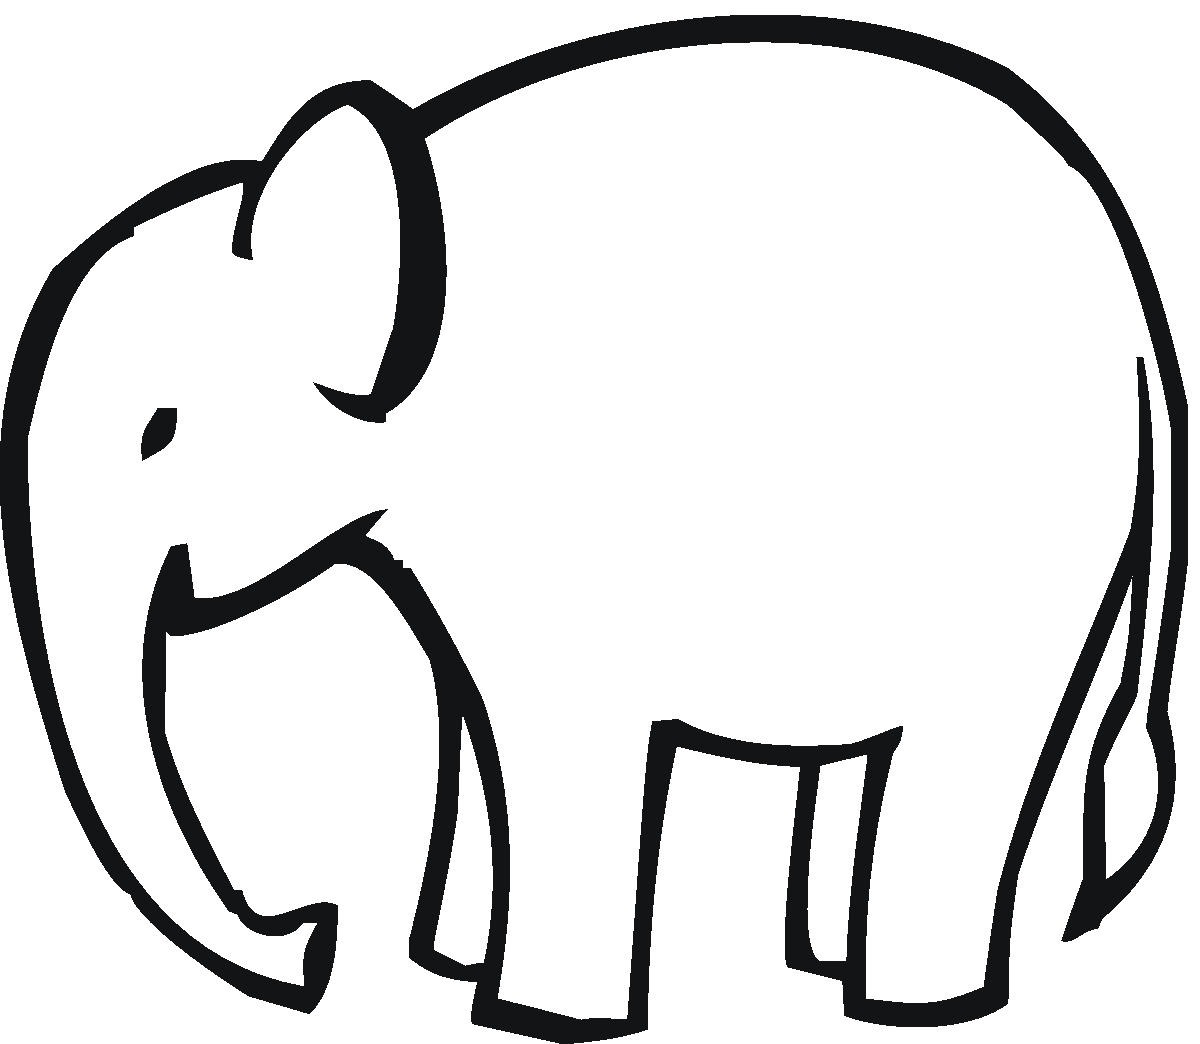 Circus Elephant Clipart Black And White | Clipart Panda - Free ...